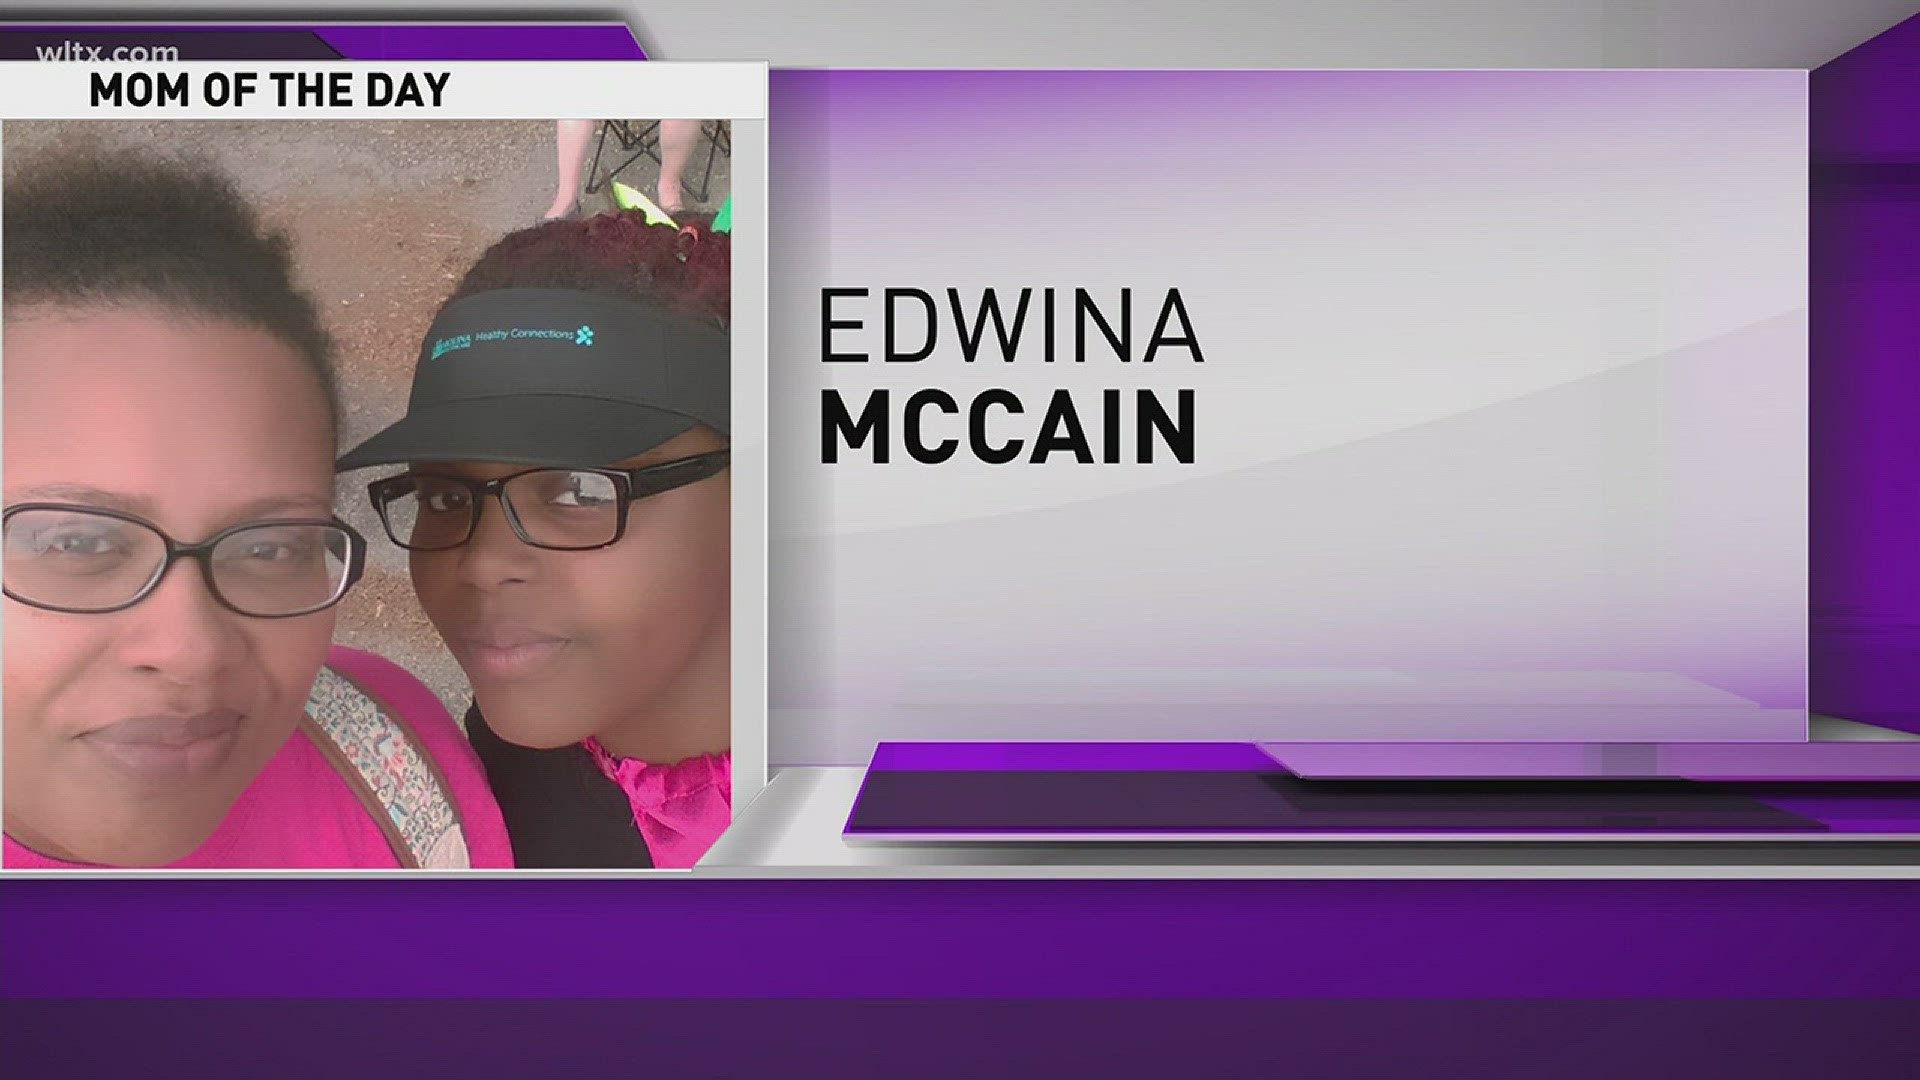 Congratulations to our Mom of the Day, Edwina McCain. Edwina was nominated by her daughter Madison.